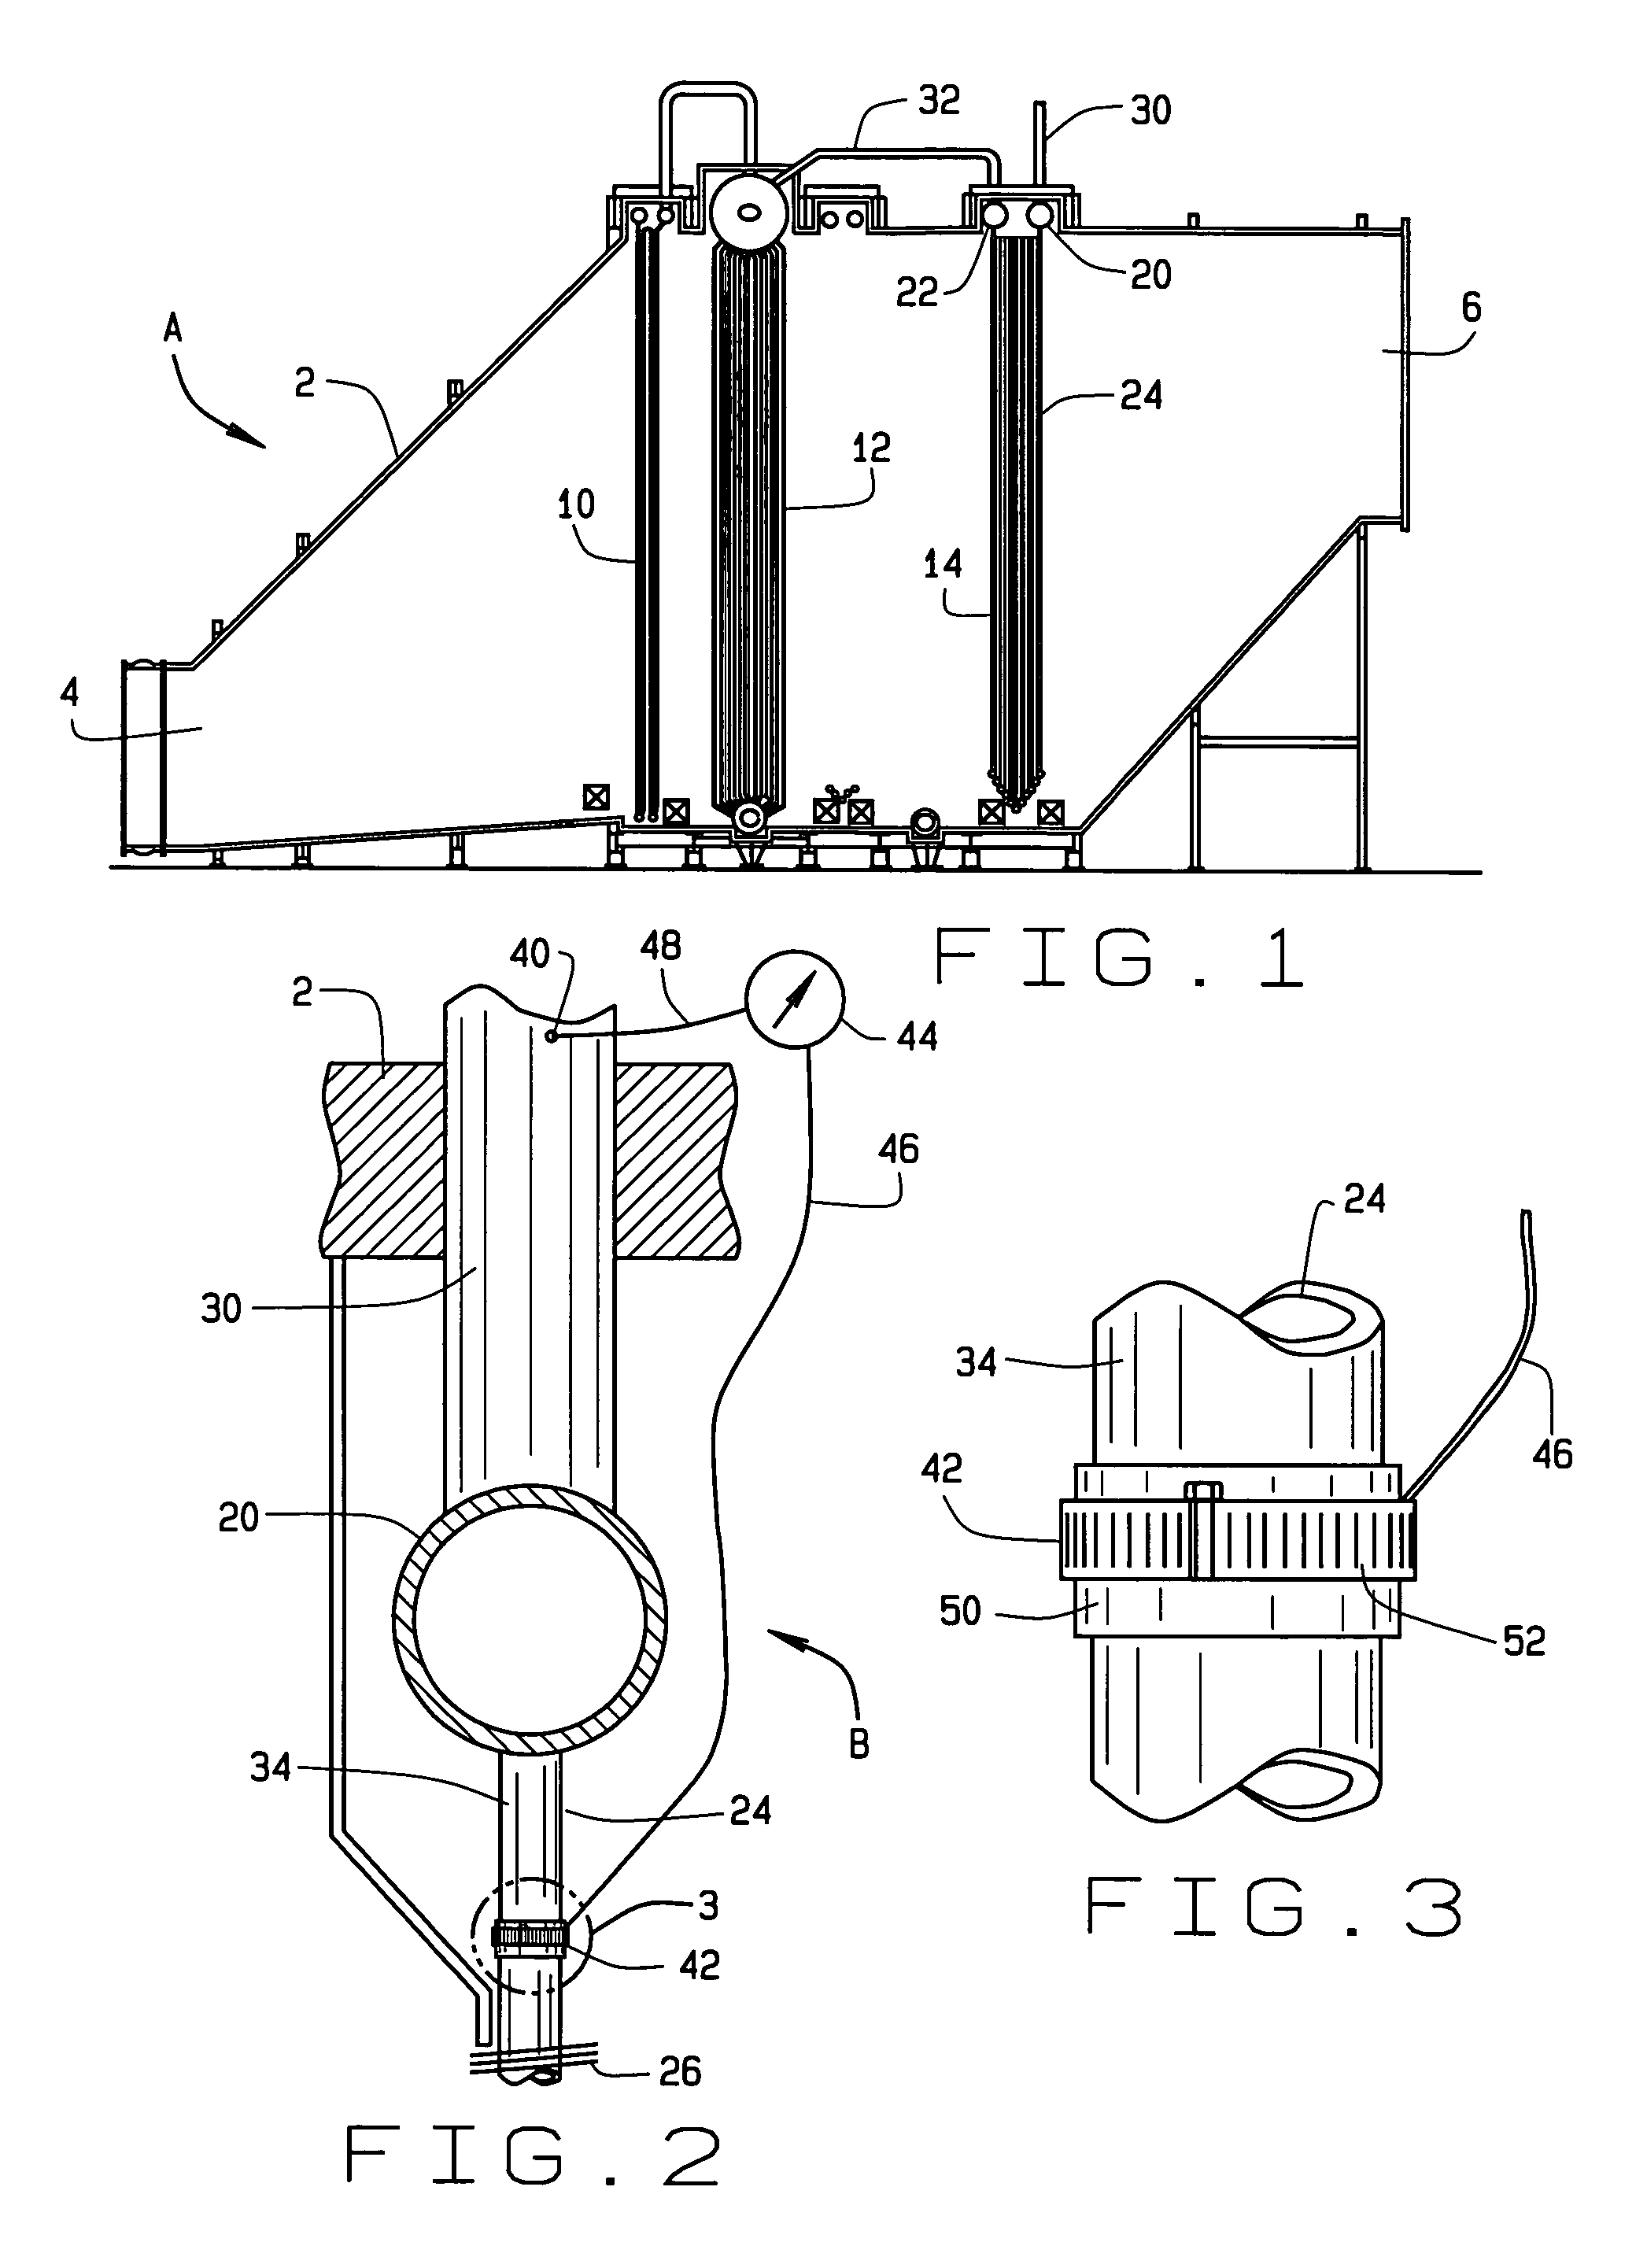 Apparatus and process for detecting condensation in a heat exchanger